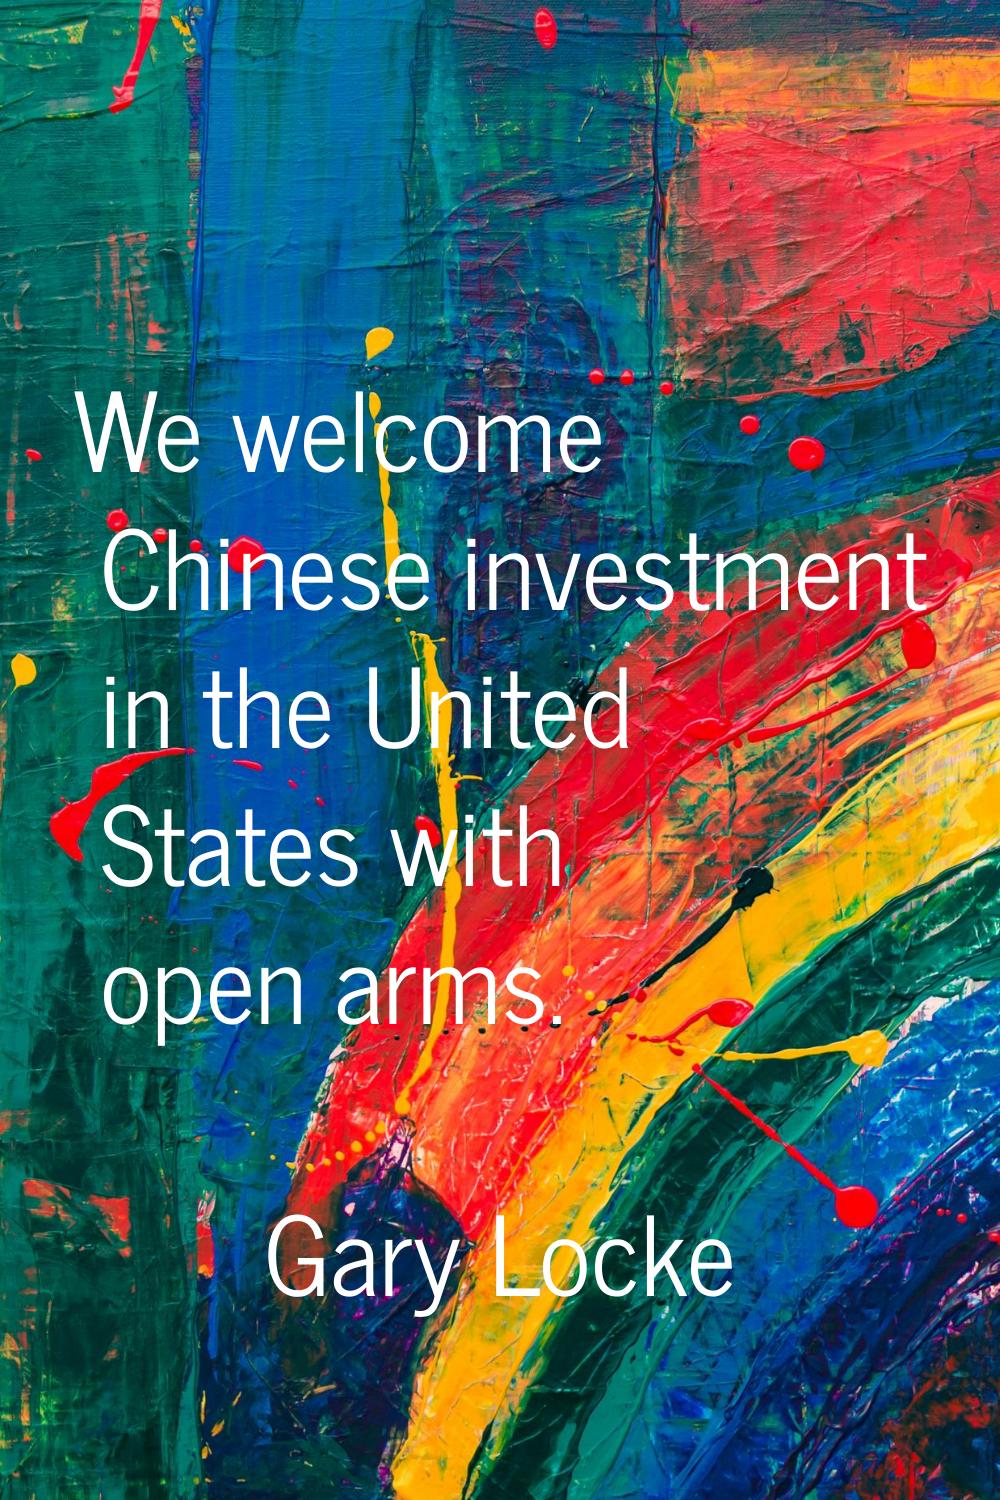 We welcome Chinese investment in the United States with open arms.